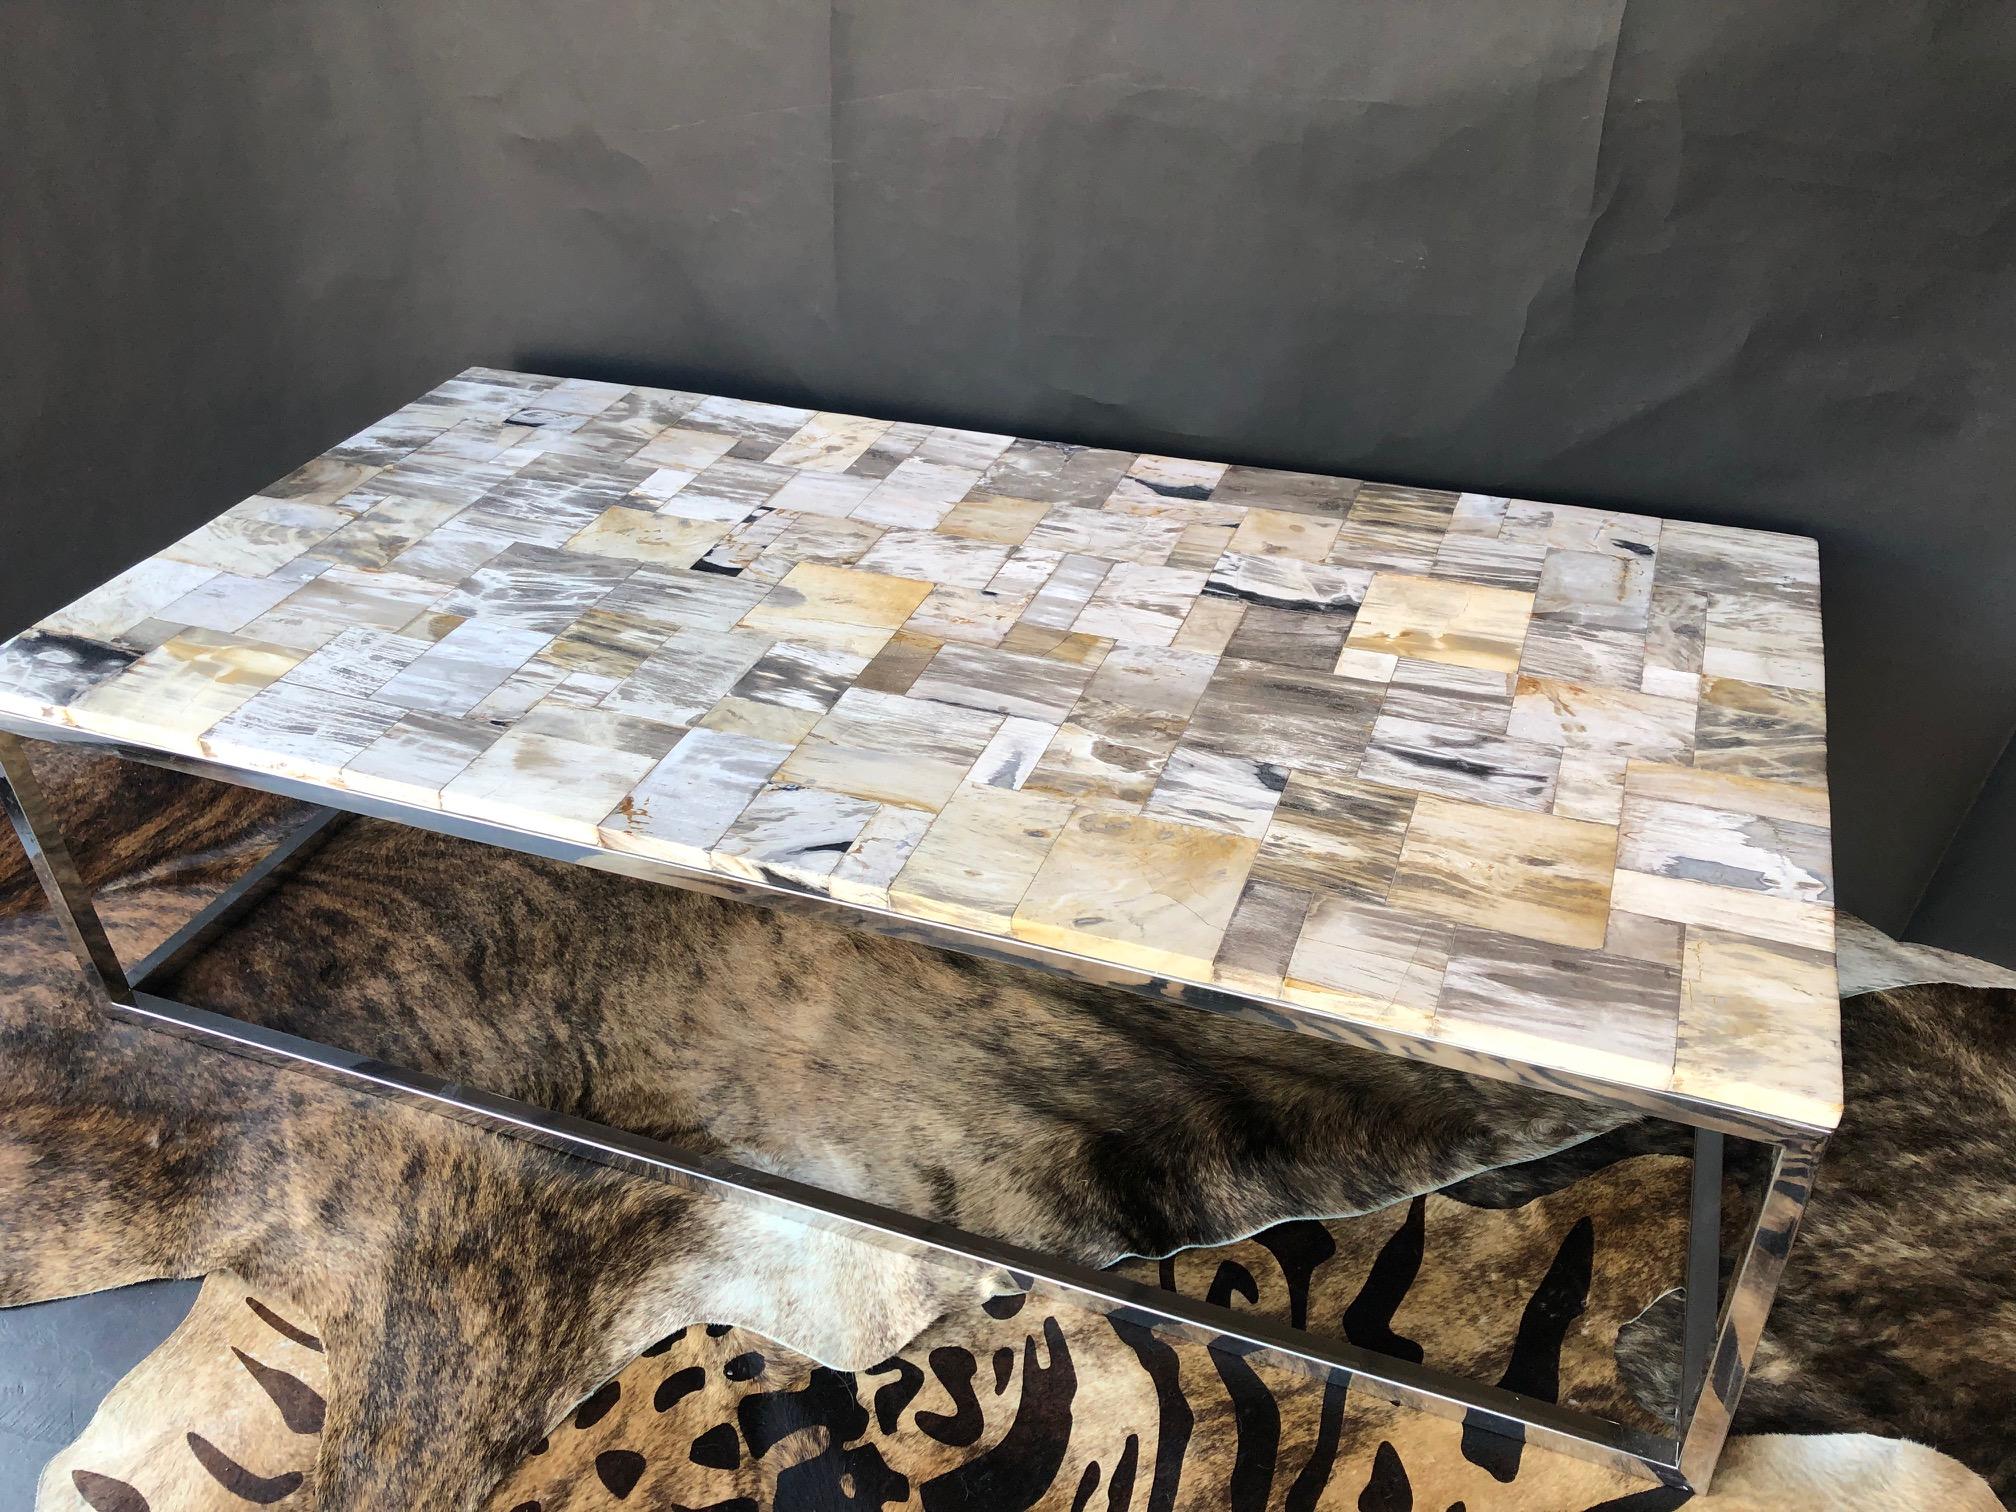 Petrified wood tiled top coffee table. Base is bronze nickel-plated.

